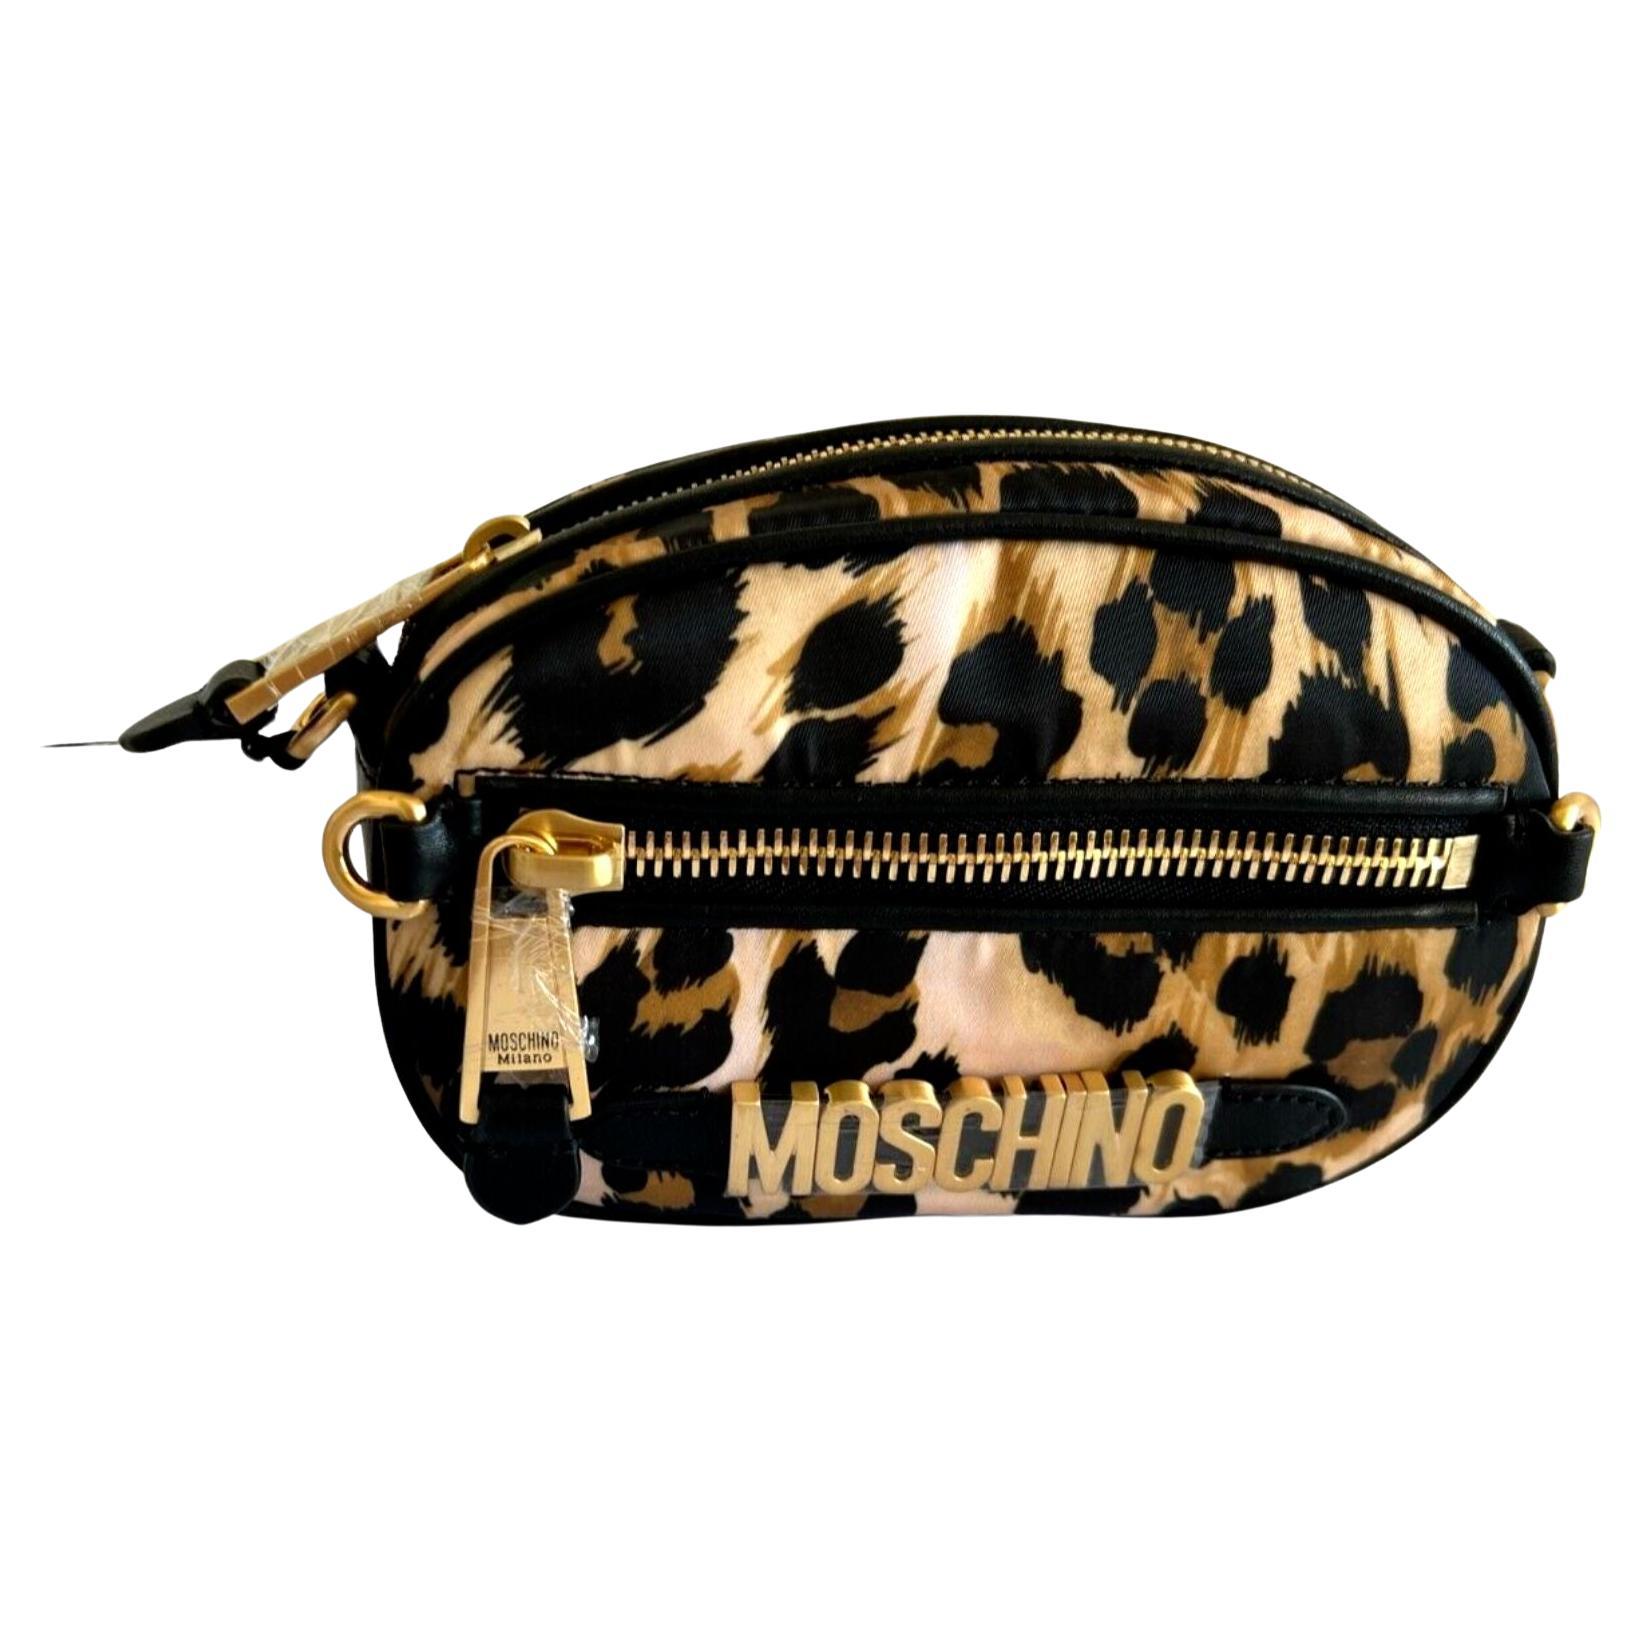 AW21 Moschino Couture Allover Leopard Print Shoulder Bag by Jeremy Scott For Sale